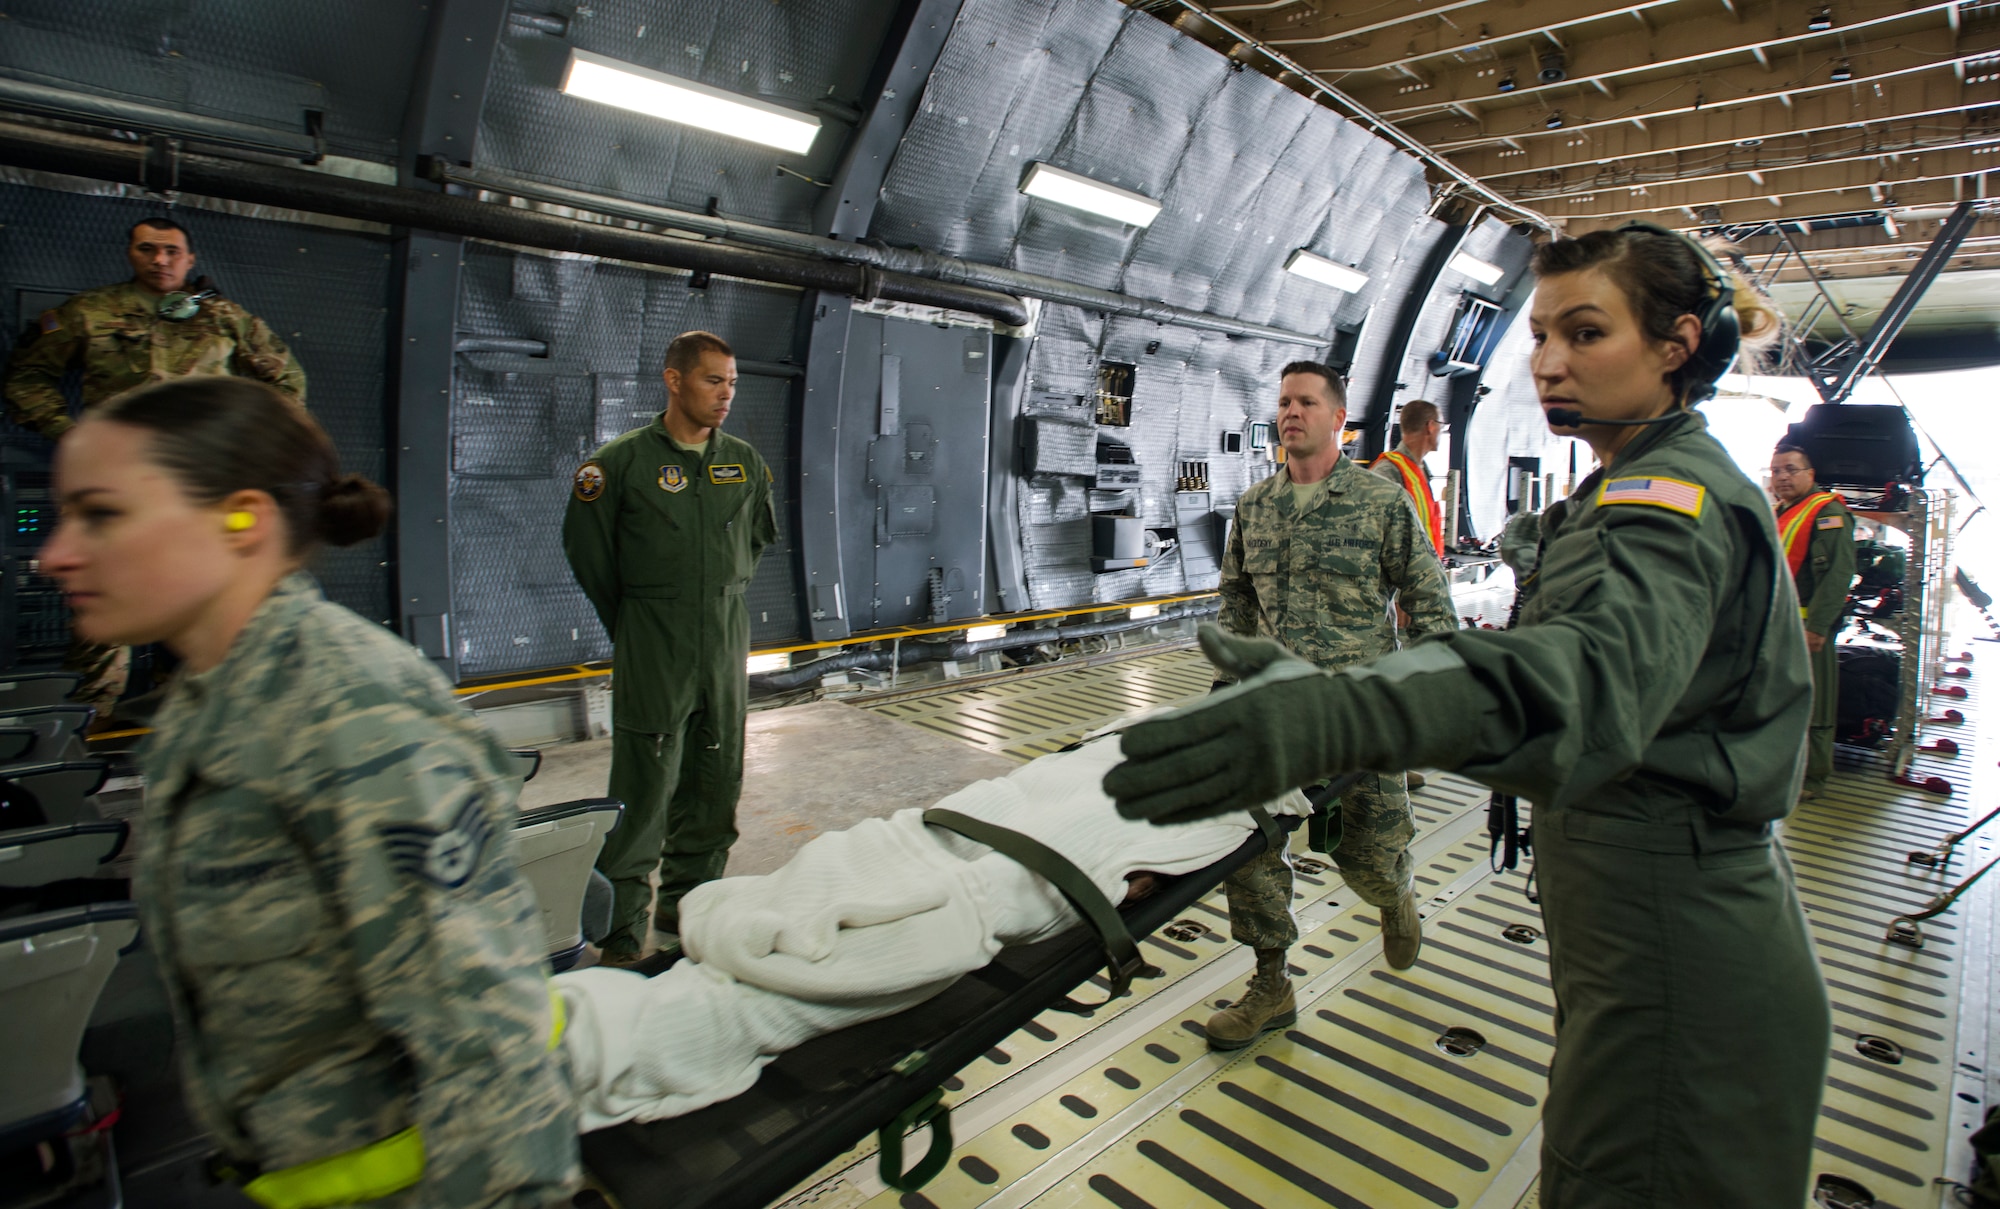 U.S. Air Force Staff Sgt. Rachael Griffin, 94th Aeromedical Evacuation Squadron medical technician, guides litter carriers with simulated patients onto a C-5M Super Galaxy during Exercise Ultimate Caduceus 2018 at Travis Air Force Base, California, Aug. 23, 2018. Ultimate Caduceus 2018 is an annual patient movement exercise designed to test the ability of U.S. Transportation Command to provide medical evacuation. (U.S. Air Force photo by Staff Sgt. Daniel Phelps)